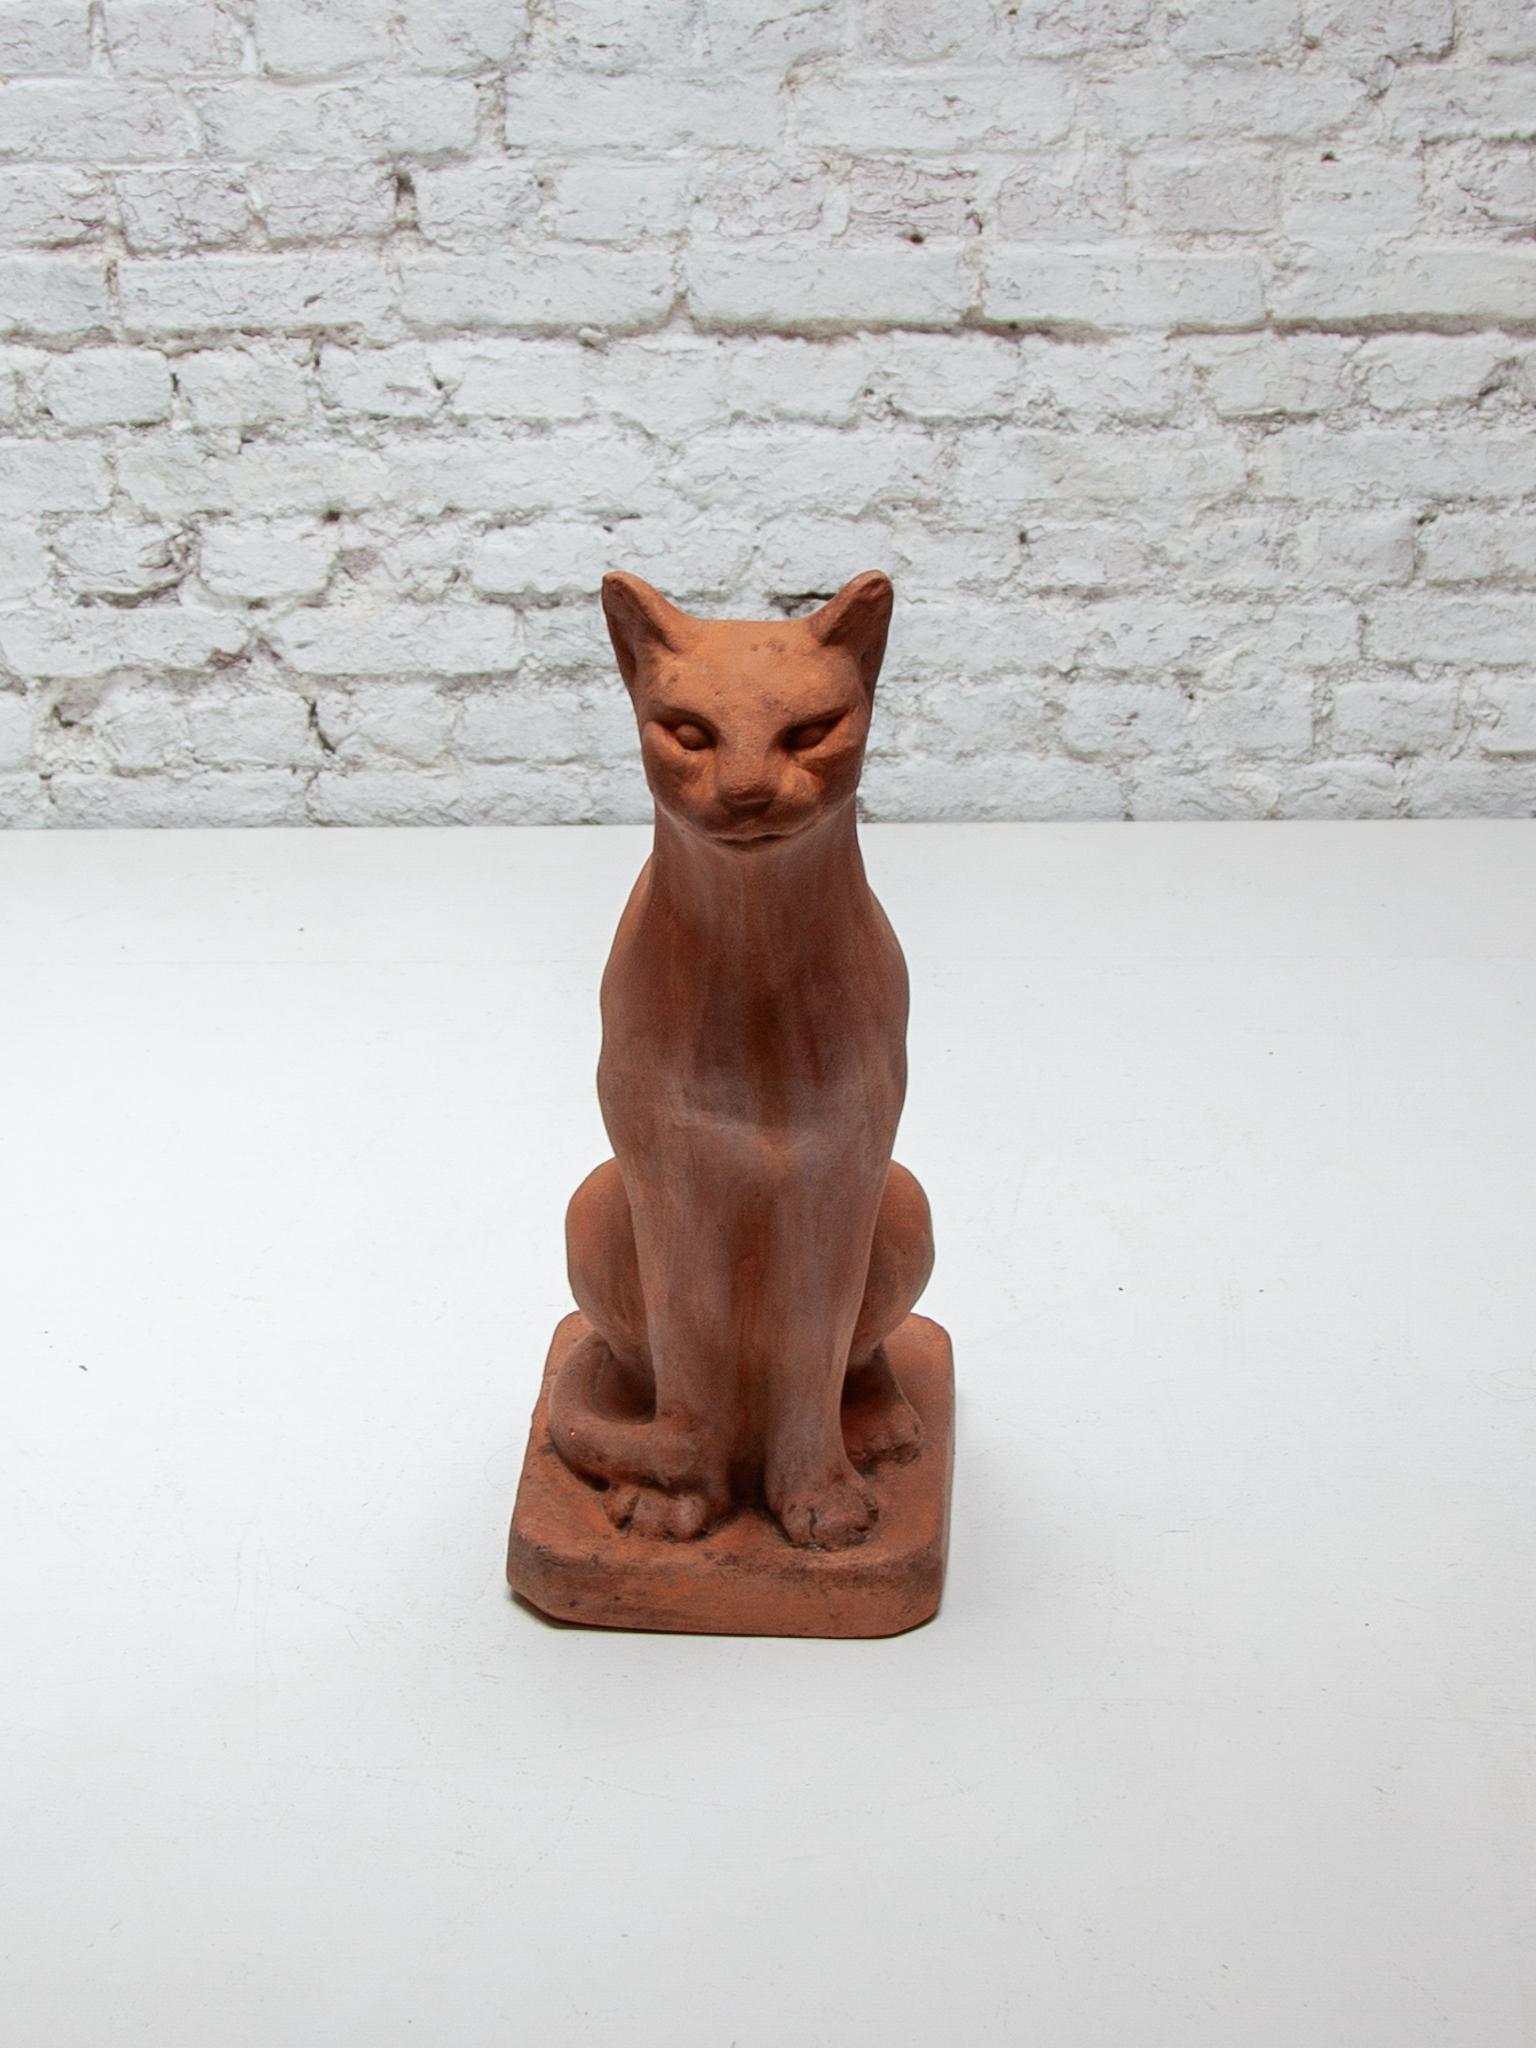 The cat is molded in terracotta with a lifelike expression, a beautiful statue for both indoors and outdoors.
Height.52 cm. in very good original condition.
